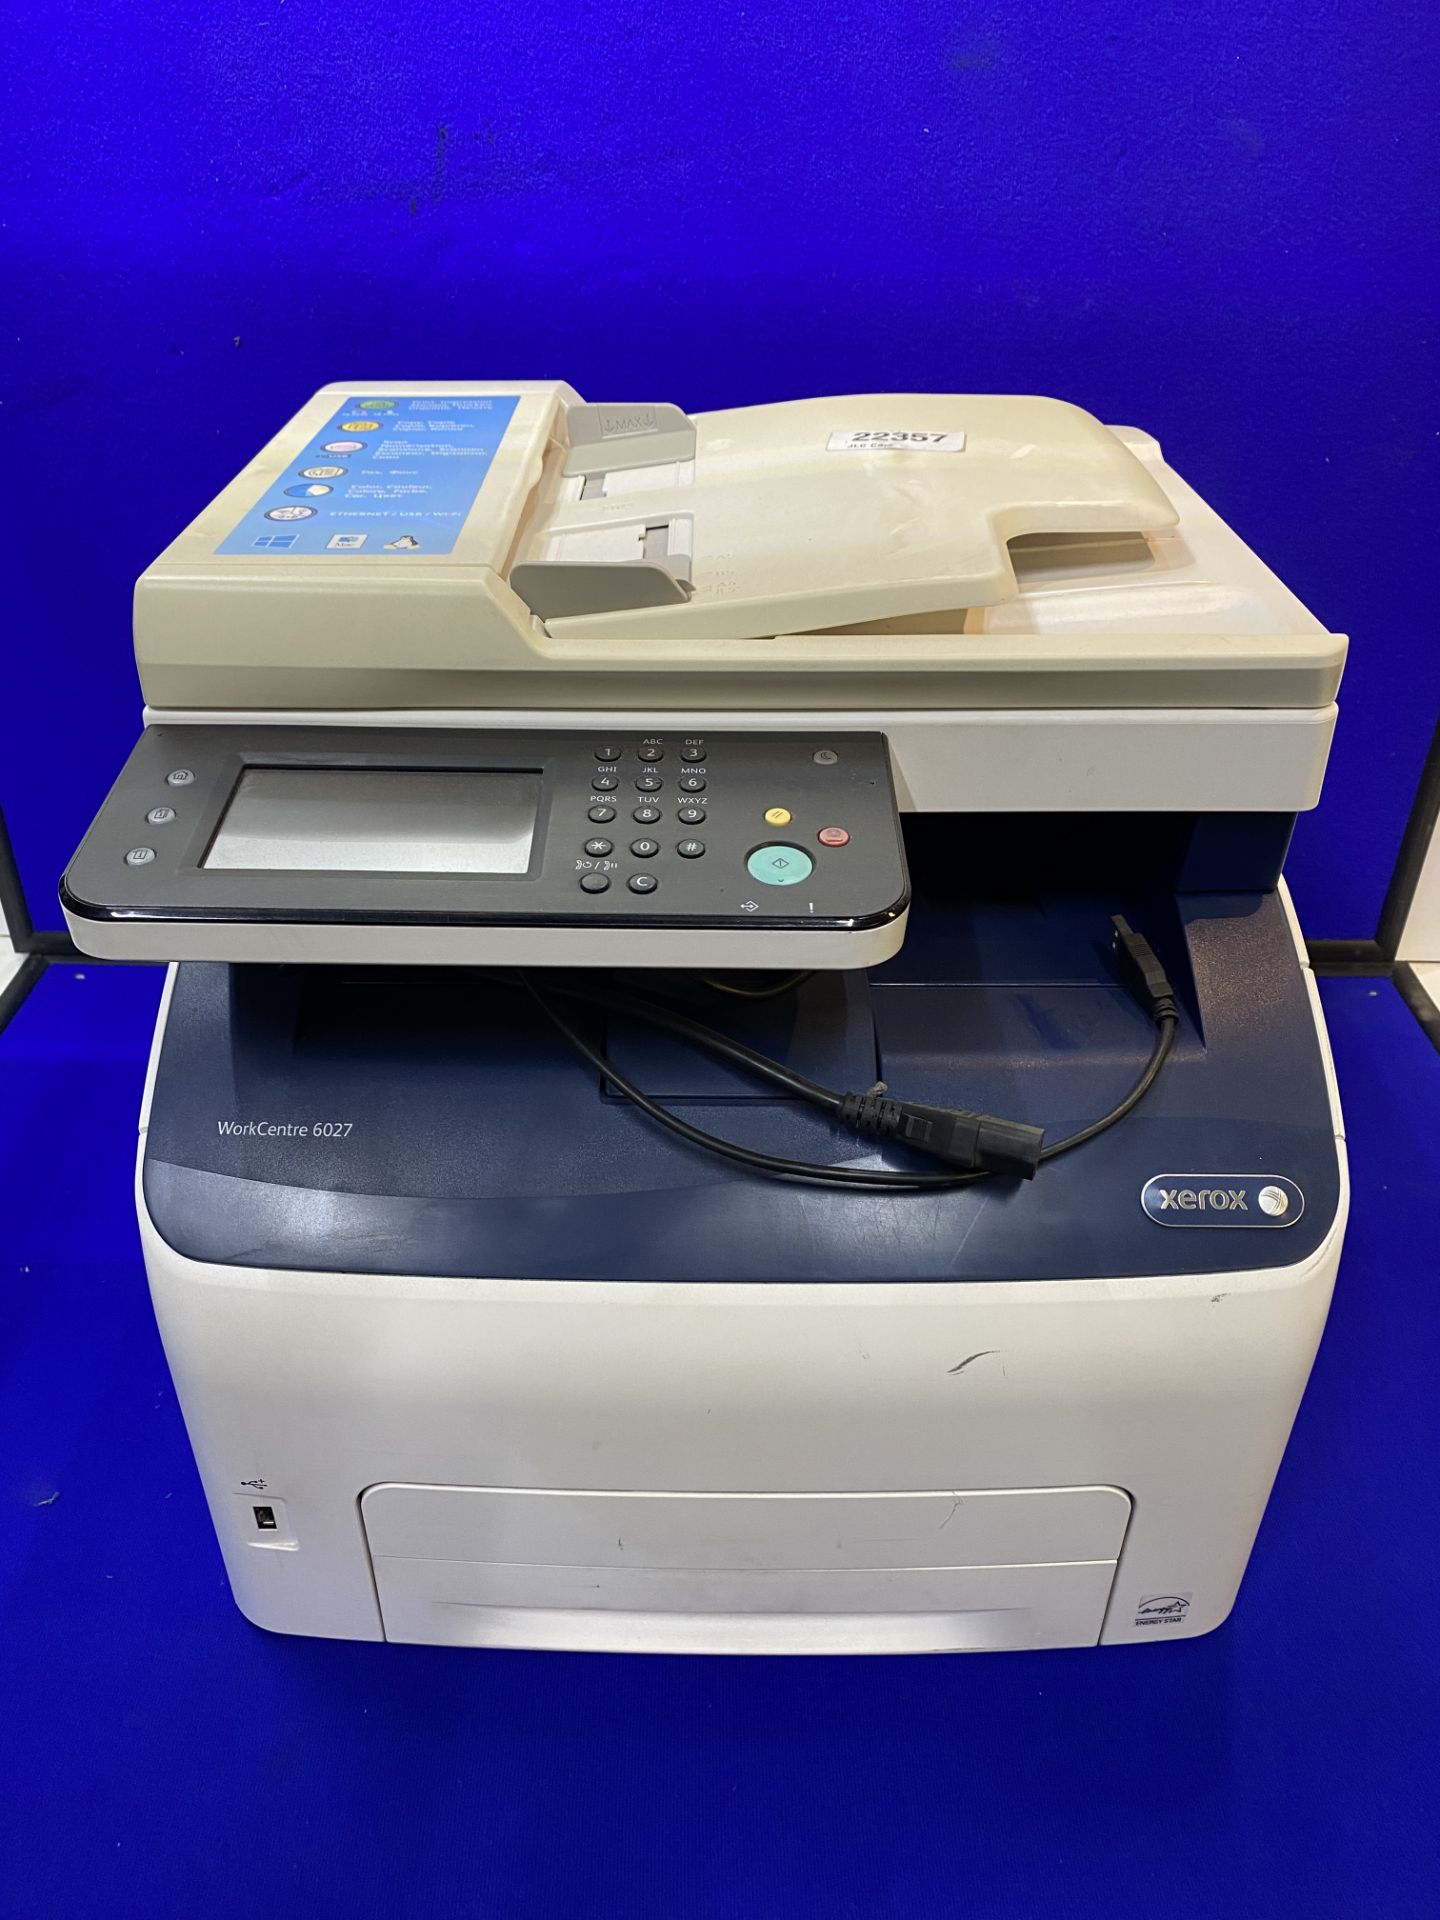 Xerox WorkCentre 6027 A4 Colour Multifunction Laser Printer - Image 2 of 22